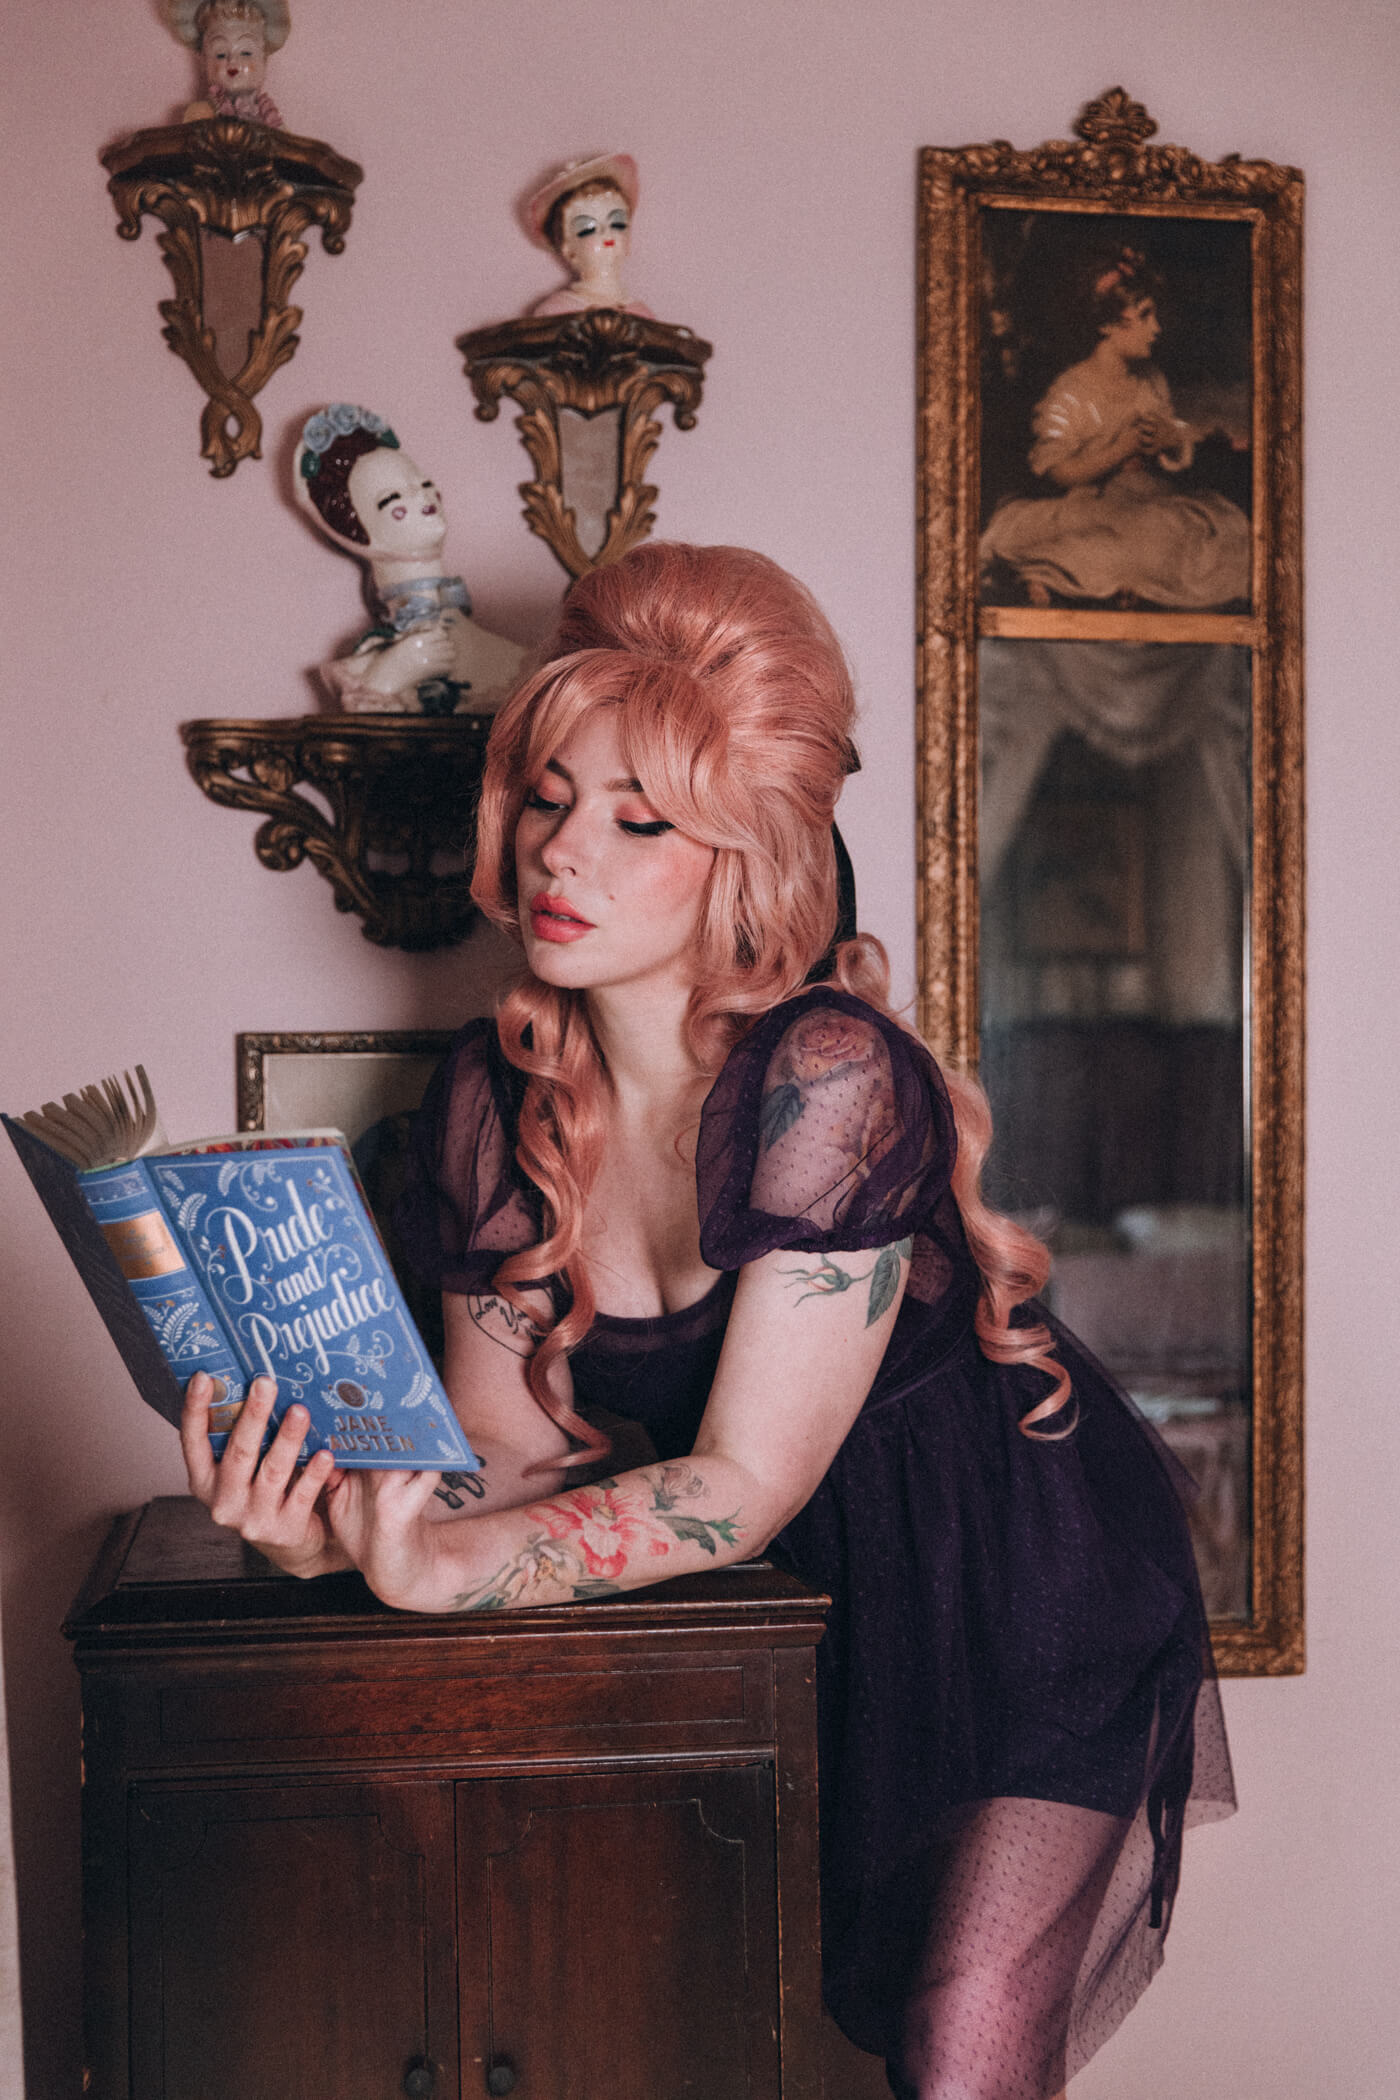 Keiko Lynn wearing a Most Ardently dress and reading Pride and Prejudice